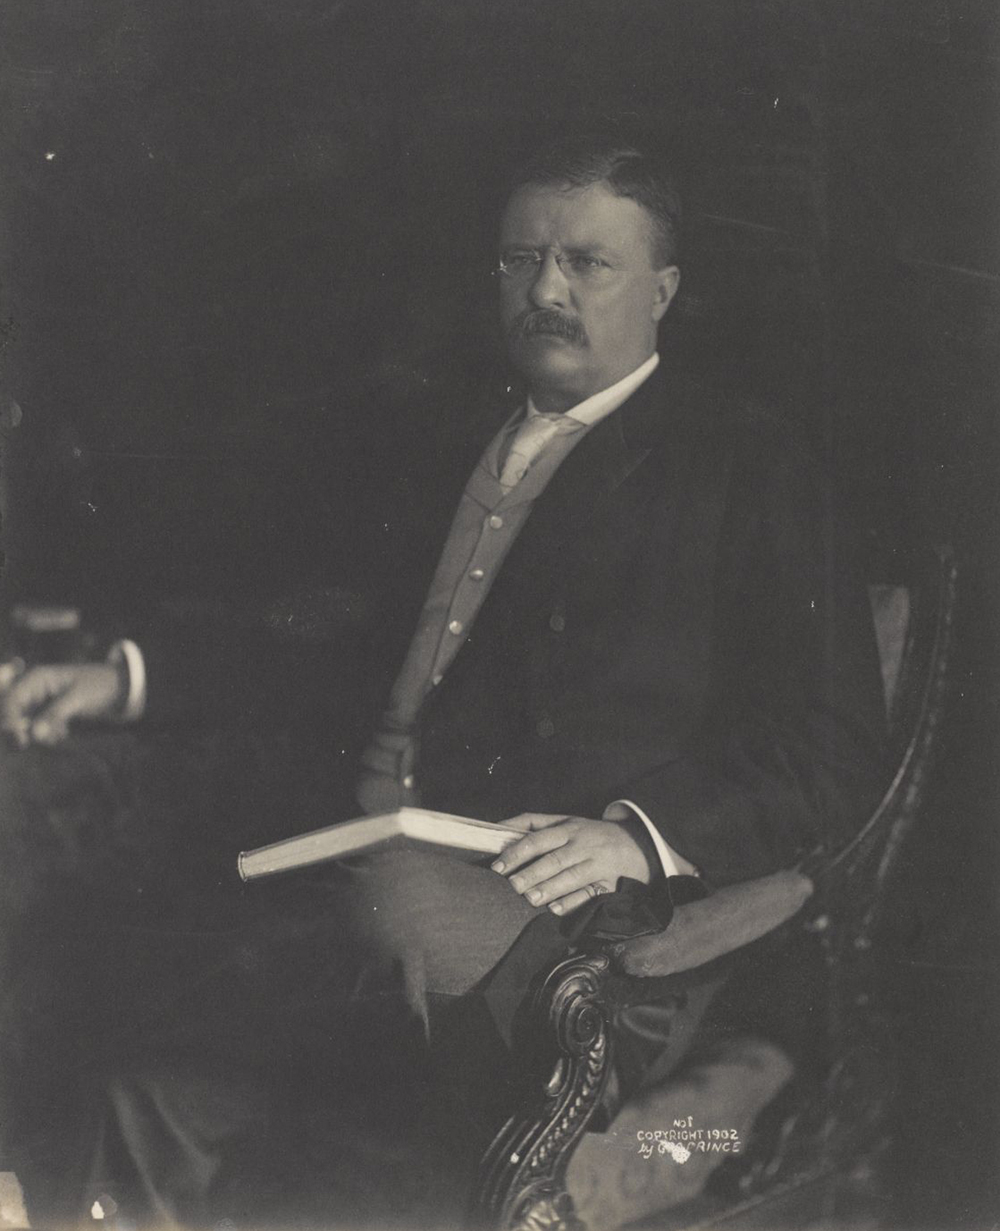 Theodore Roosevelt holding a book in his lap, 1902. Library of Congress, Prints and Photographs Division.